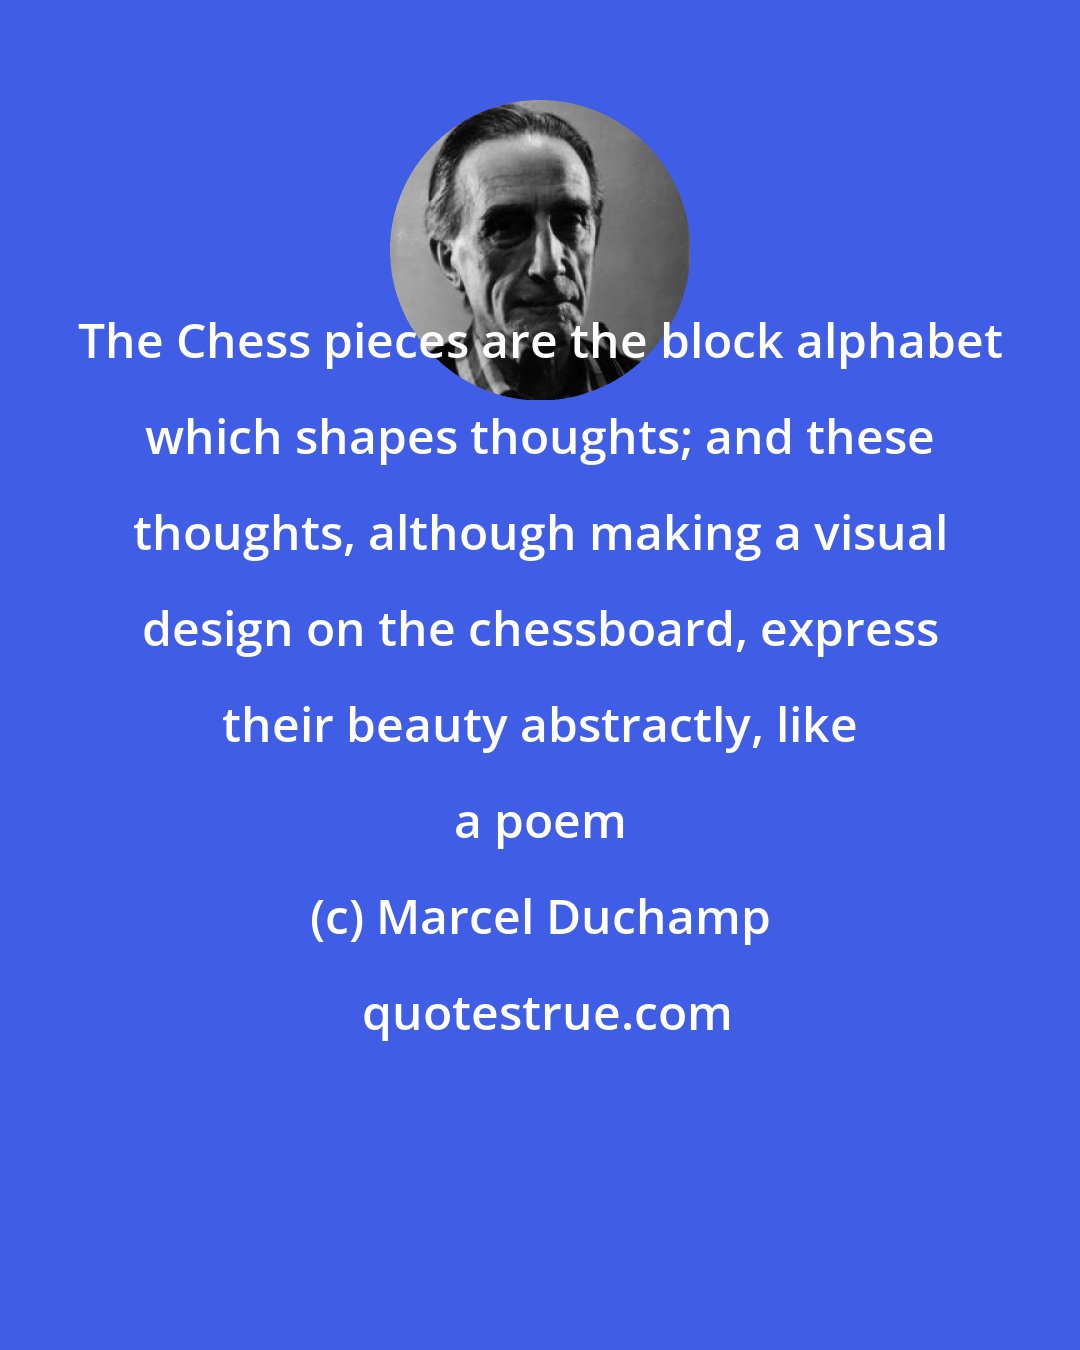 Marcel Duchamp: The Chess pieces are the block alphabet which shapes thoughts; and these thoughts, although making a visual design on the chessboard, express their beauty abstractly, like a poem